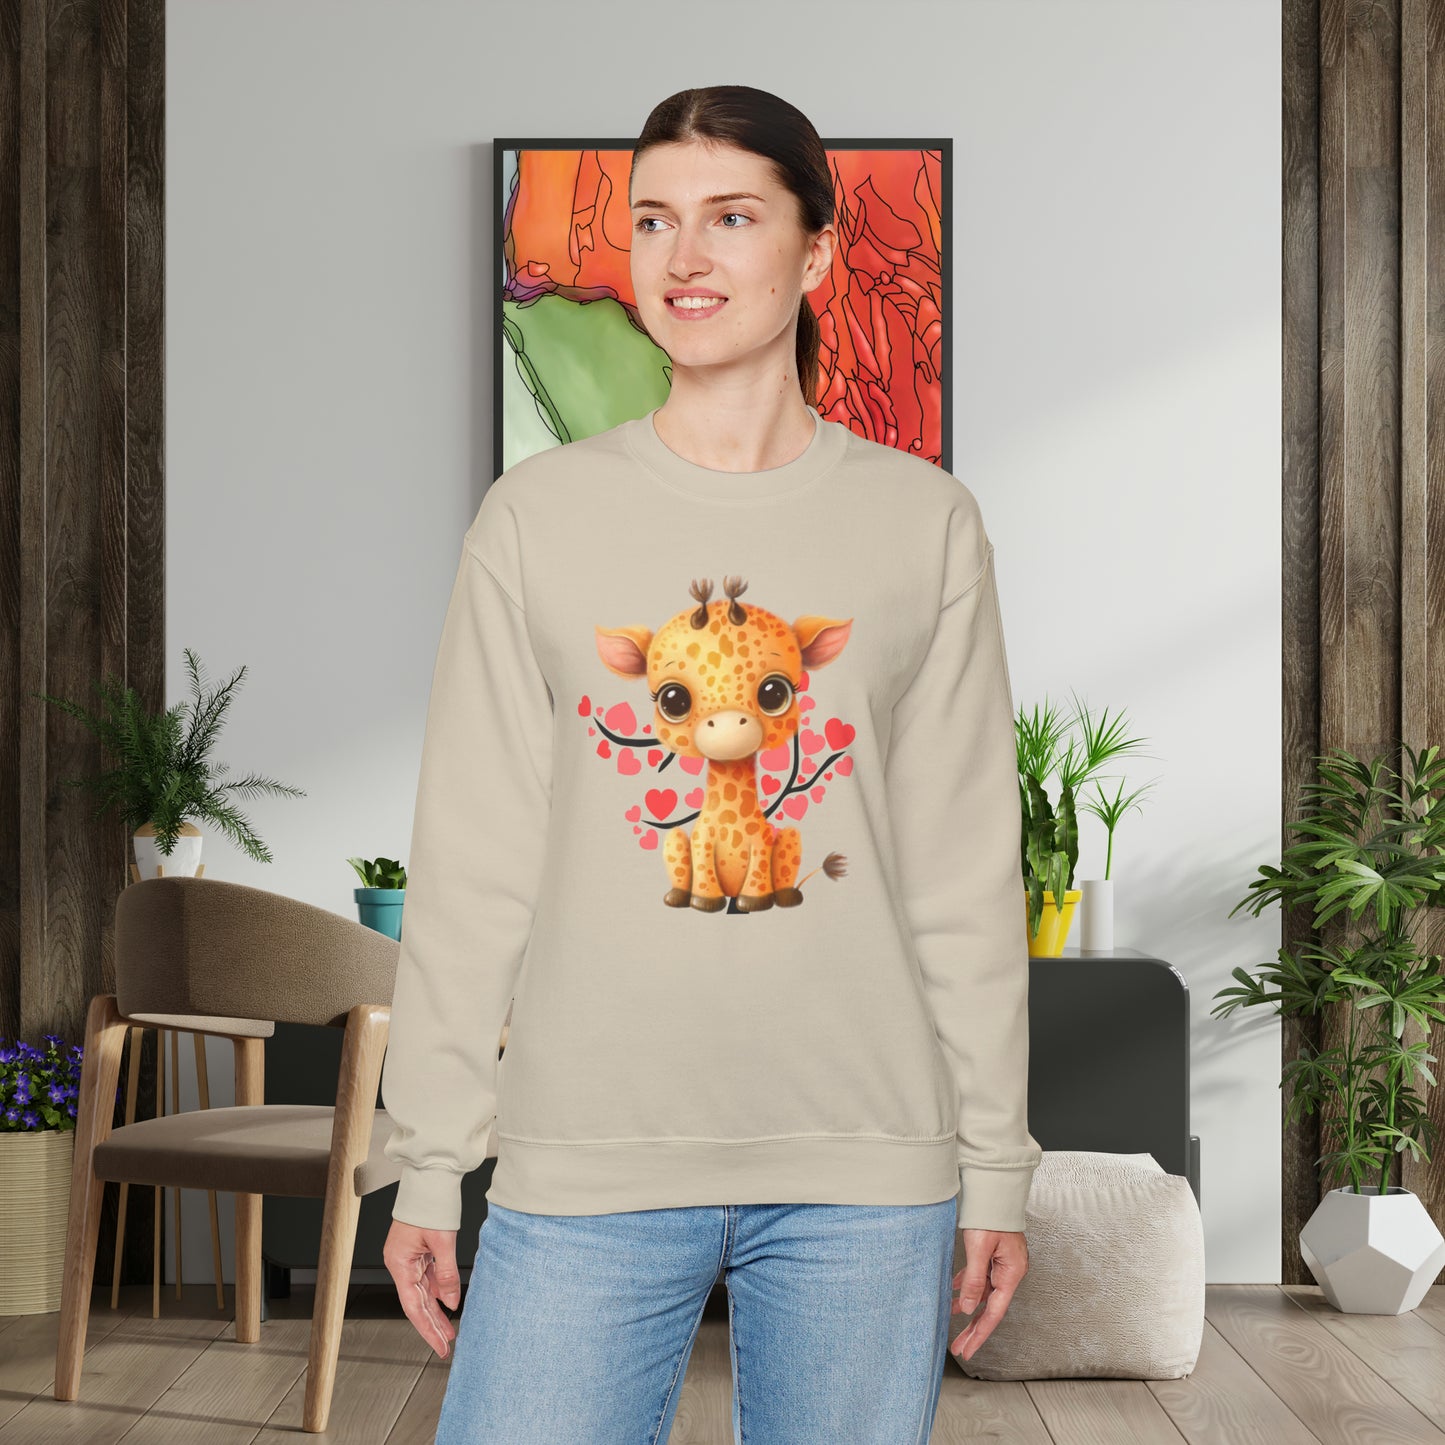 Love giraffes? Here’s the sweatshirt for you! Give the gift of this Unisex Heavy Blend™ Crewneck Sweatshirt or get one for yourself.